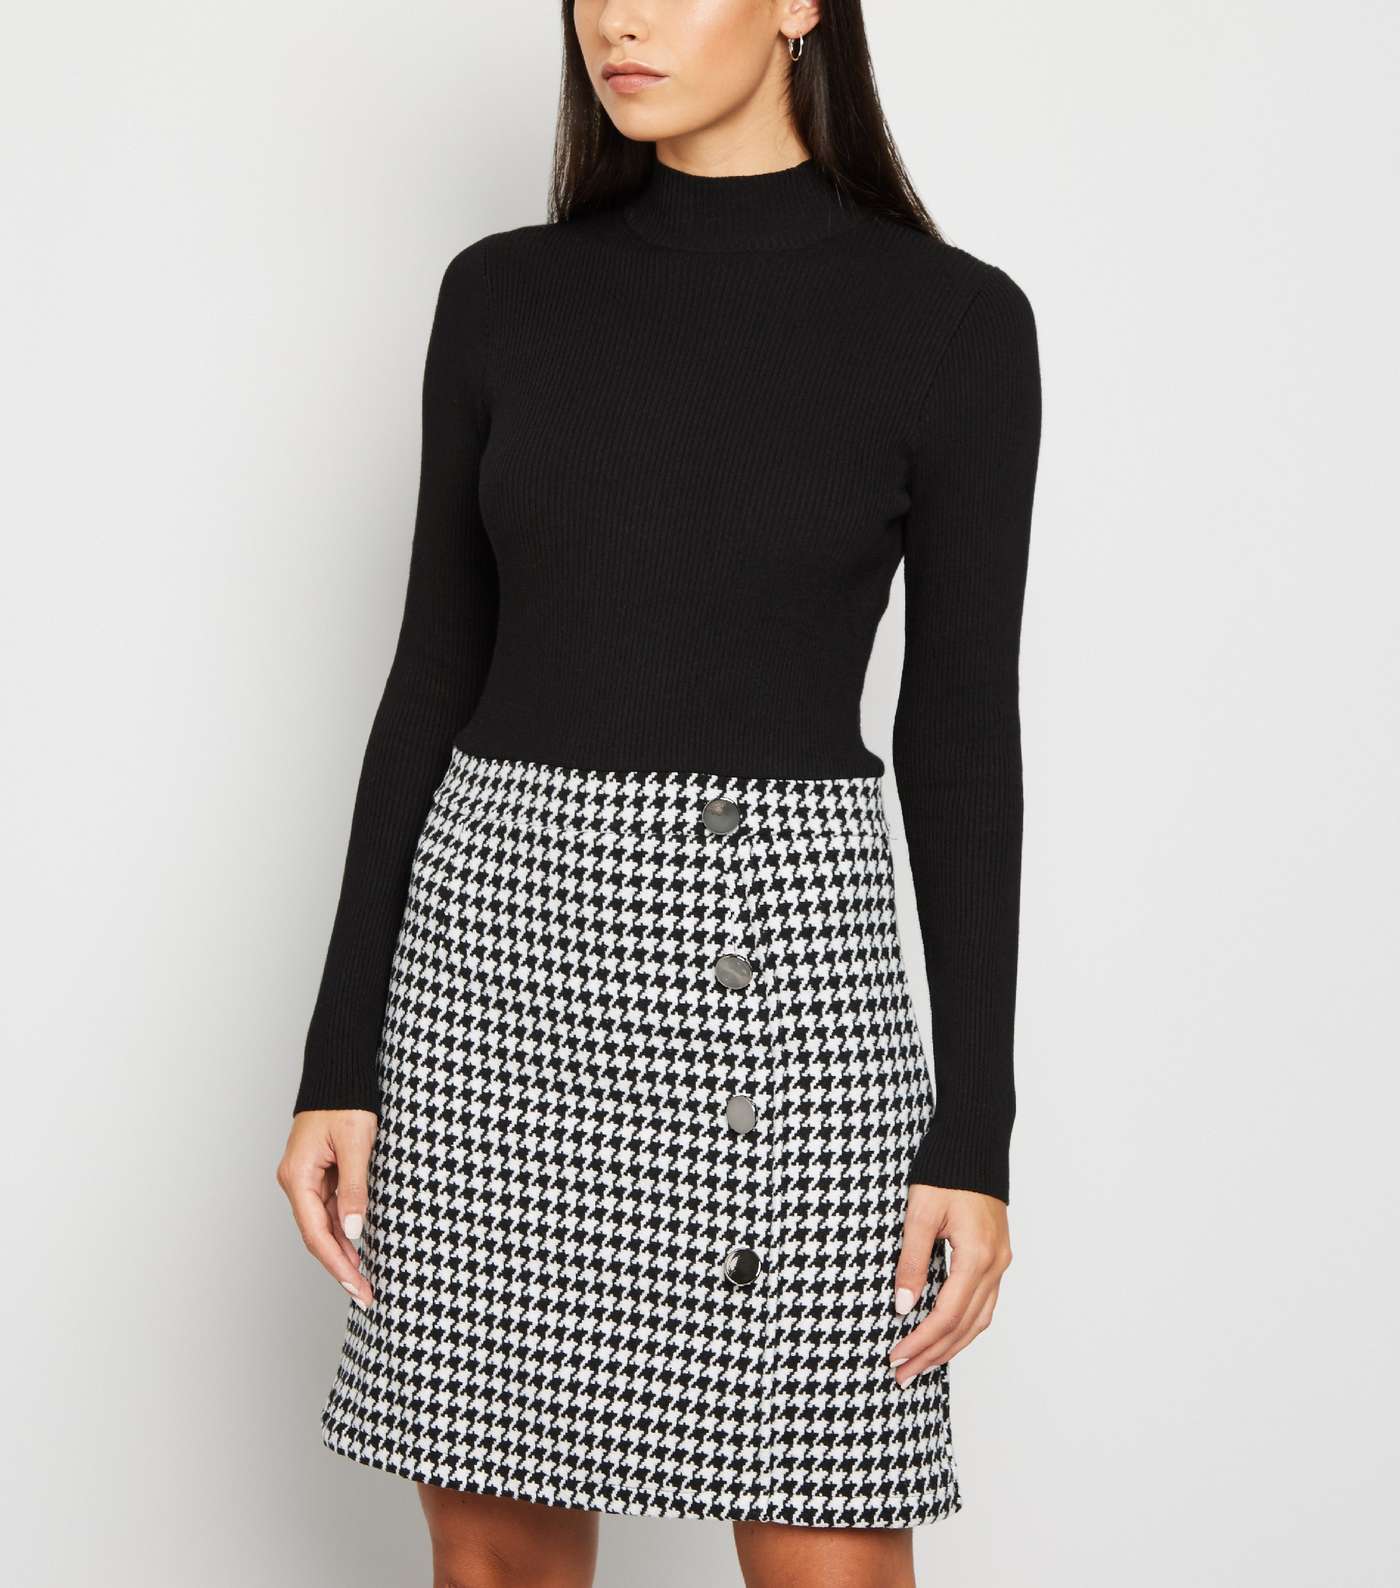 Black Dogtooth 2 in 1 Dress Image 2